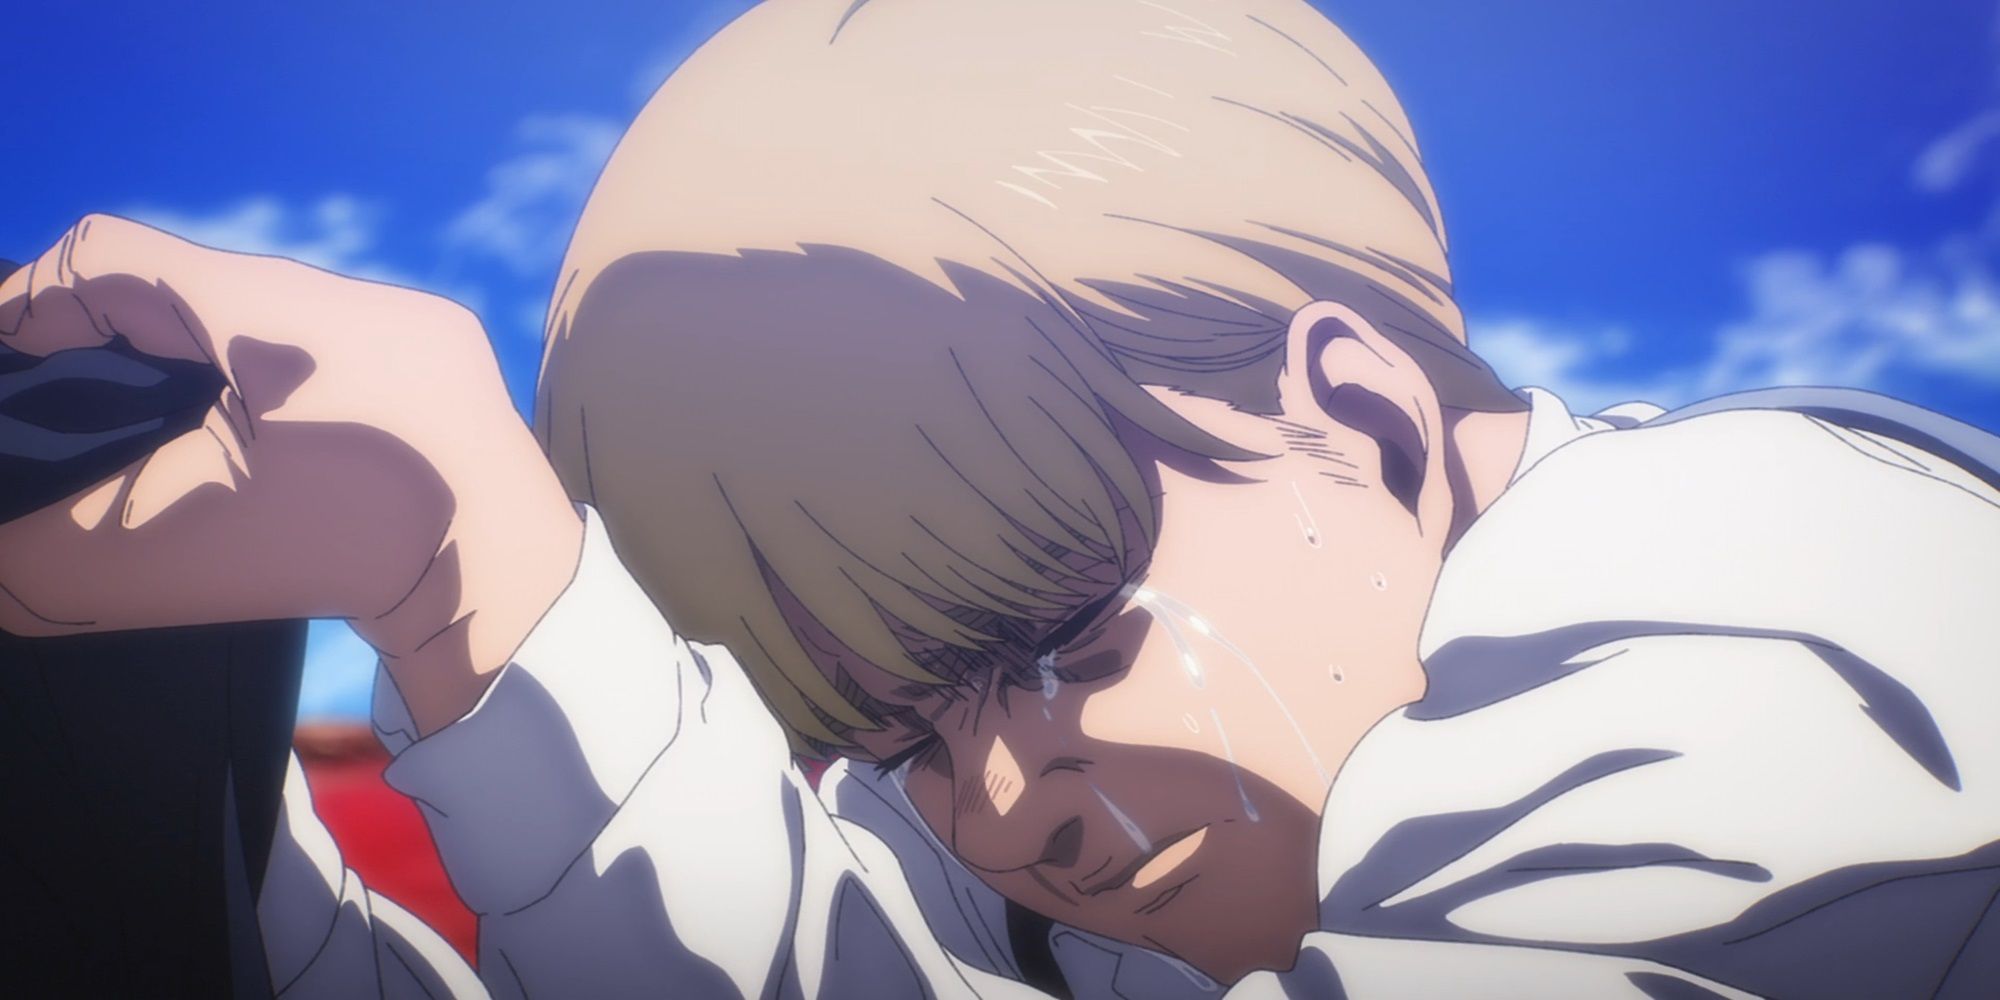 Armin crying at the end